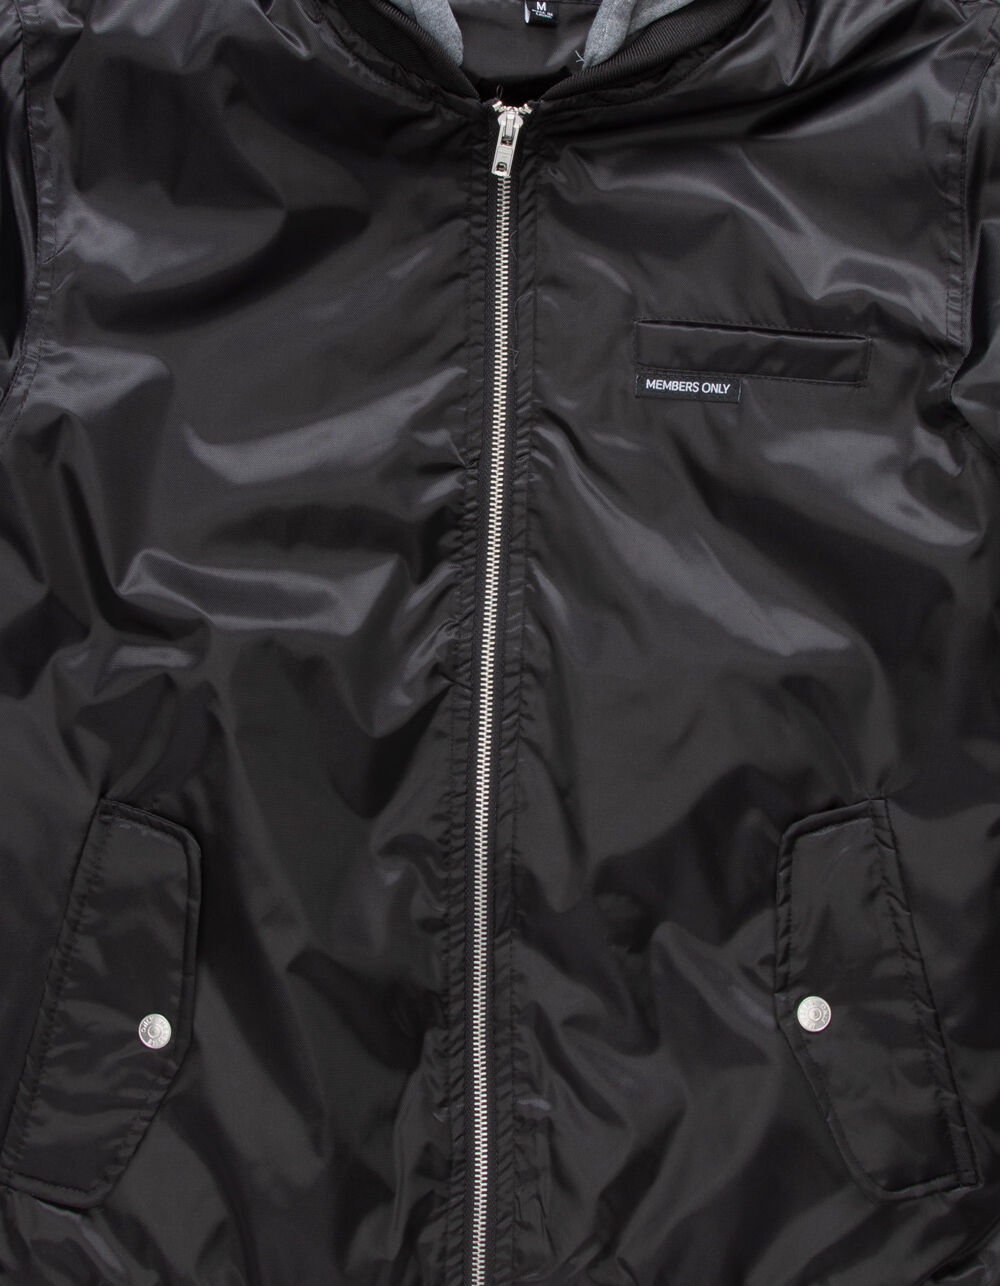 Members Only Flight Two Tone Bomber Jacket